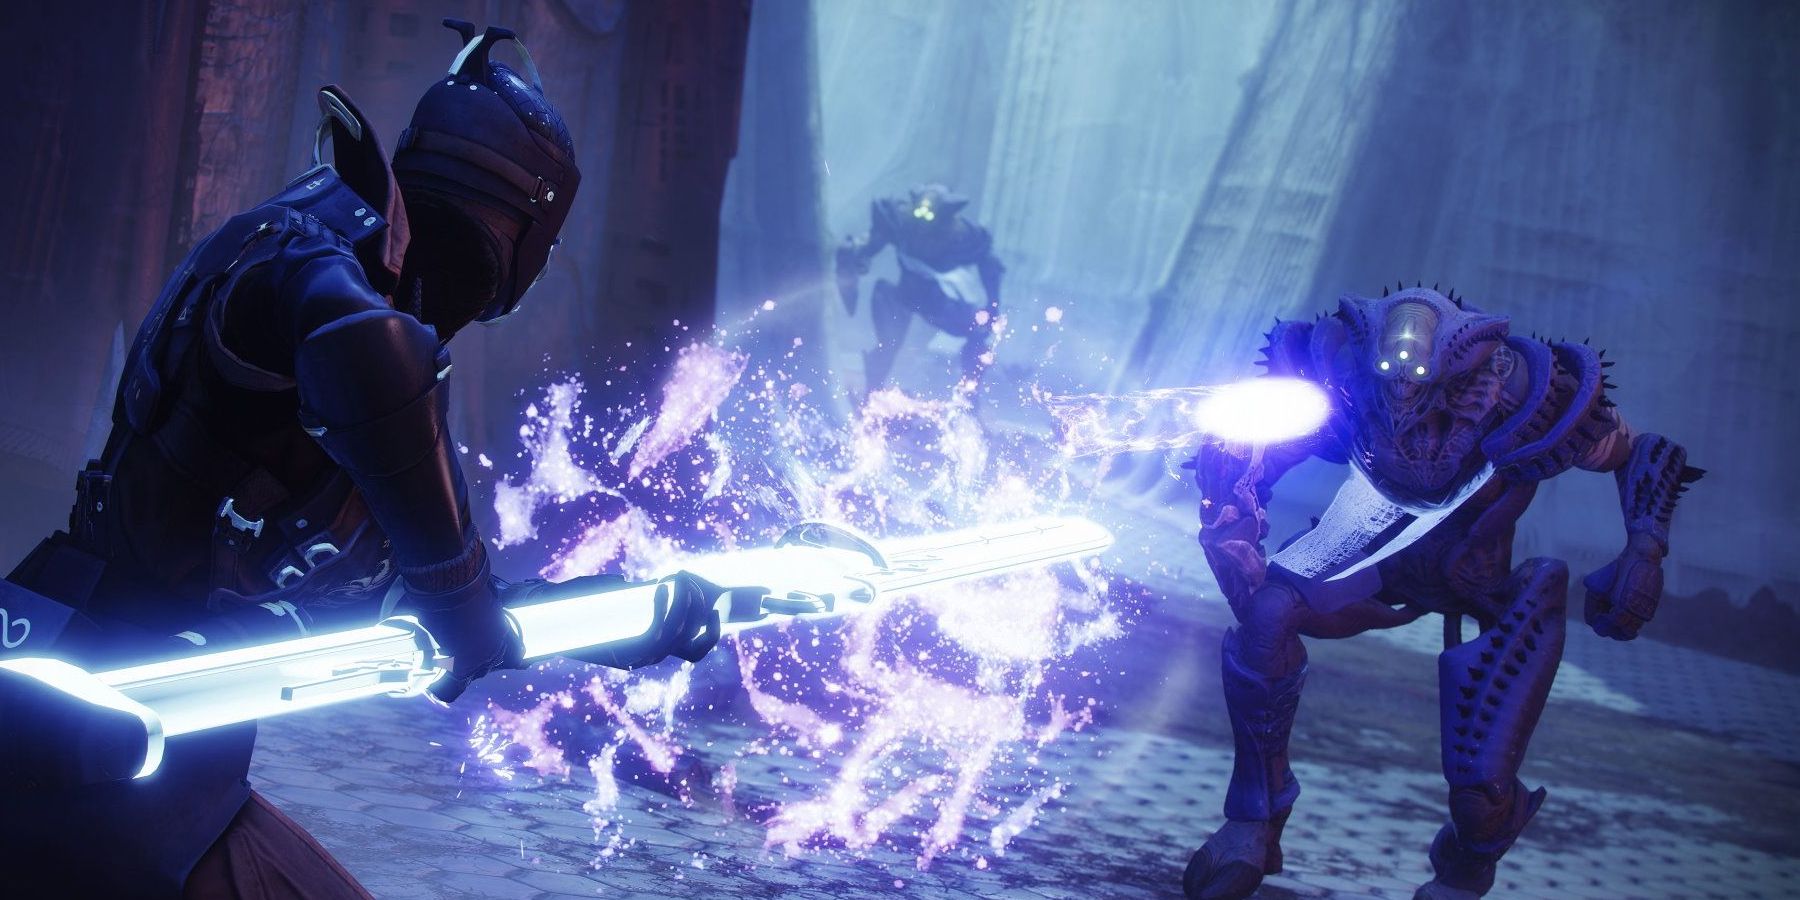 destiny 2 glaive shooting hive enemy in the new witch queen expansion